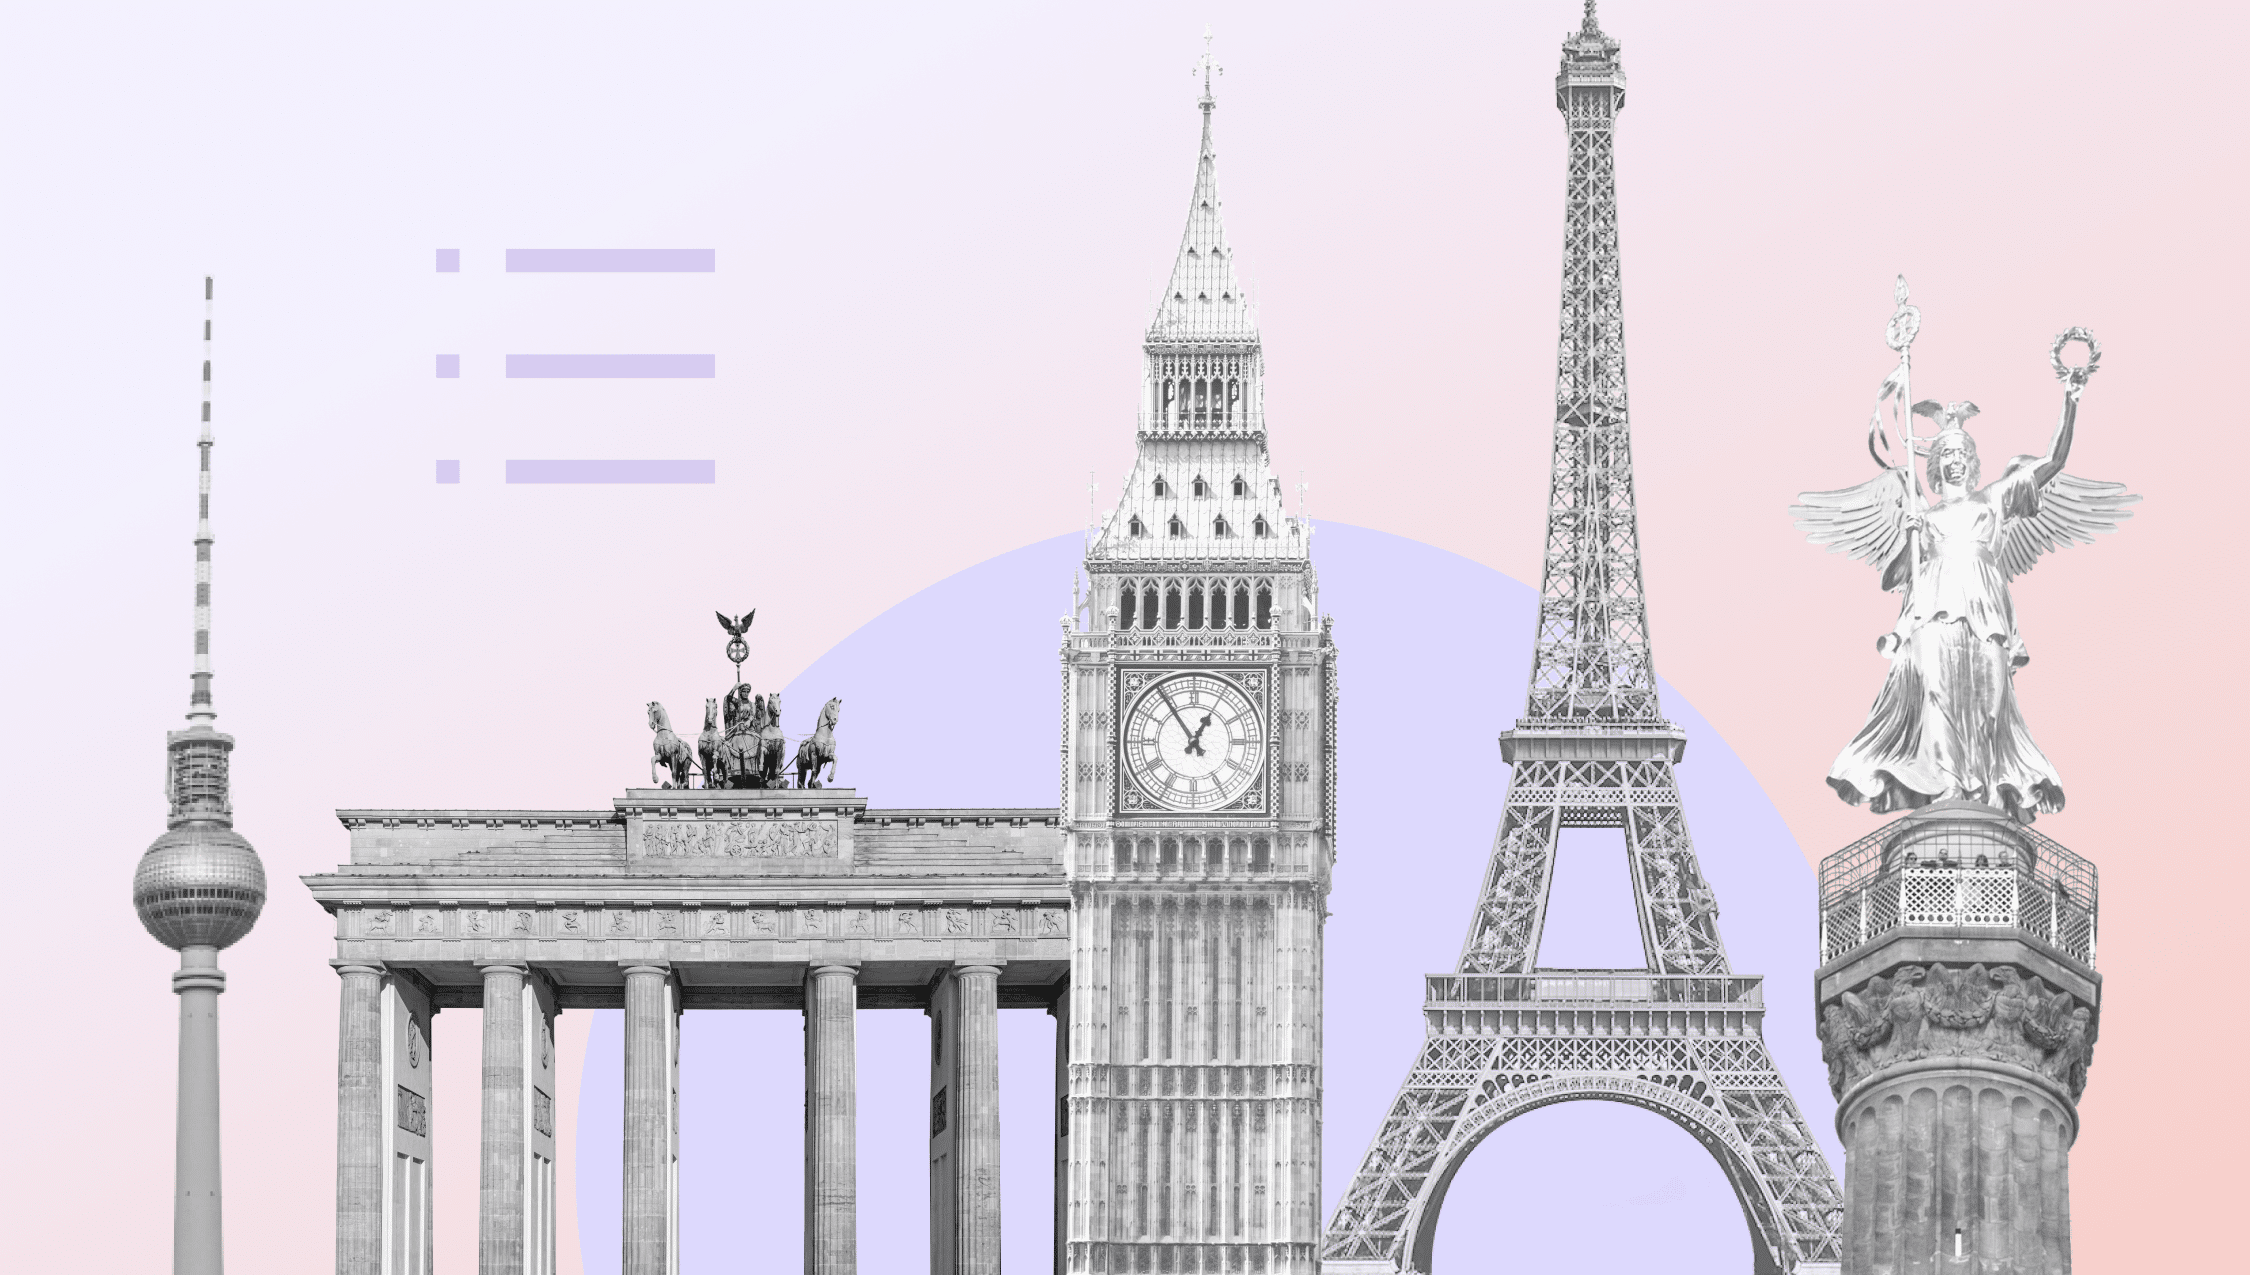 Monuments from the biggest European capitals, including the Eiffel Tower in Paris, Big Ben in London, and the TV Tower in Berlin.